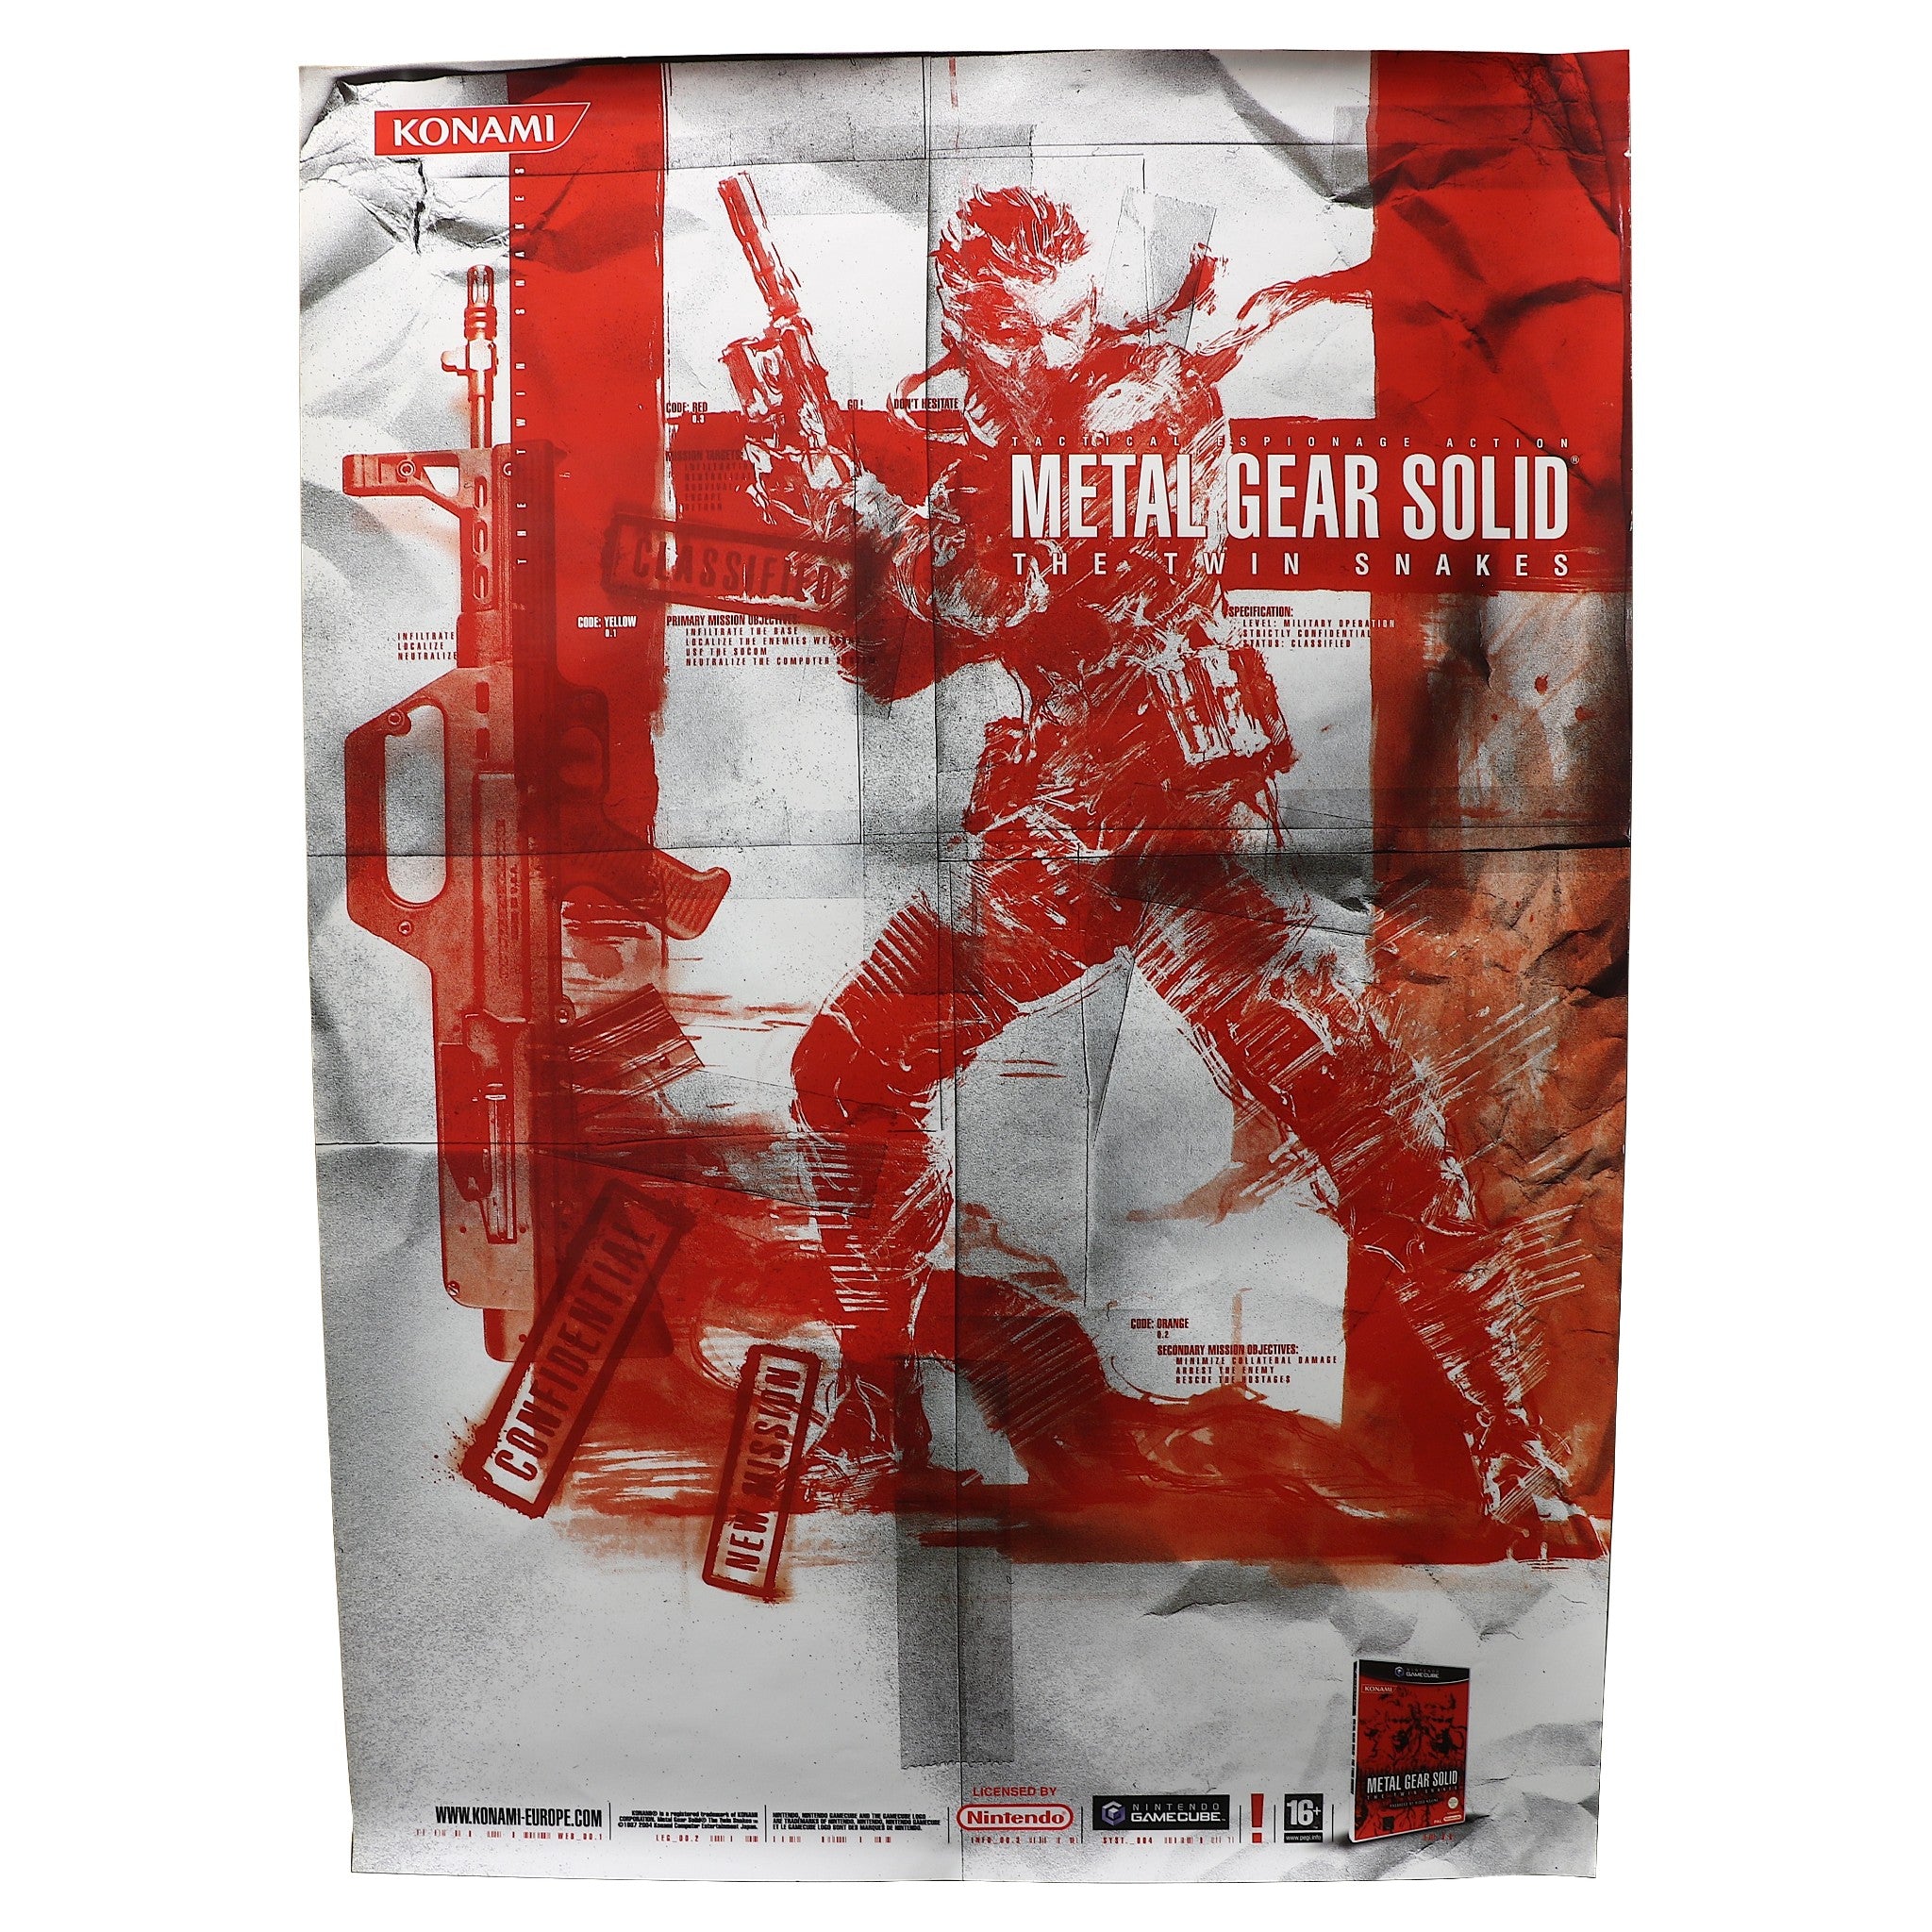 Metal Gear Solid Twin Snakes (MGS) Original (LARGE) Poster Artwork | 59.5x84cm